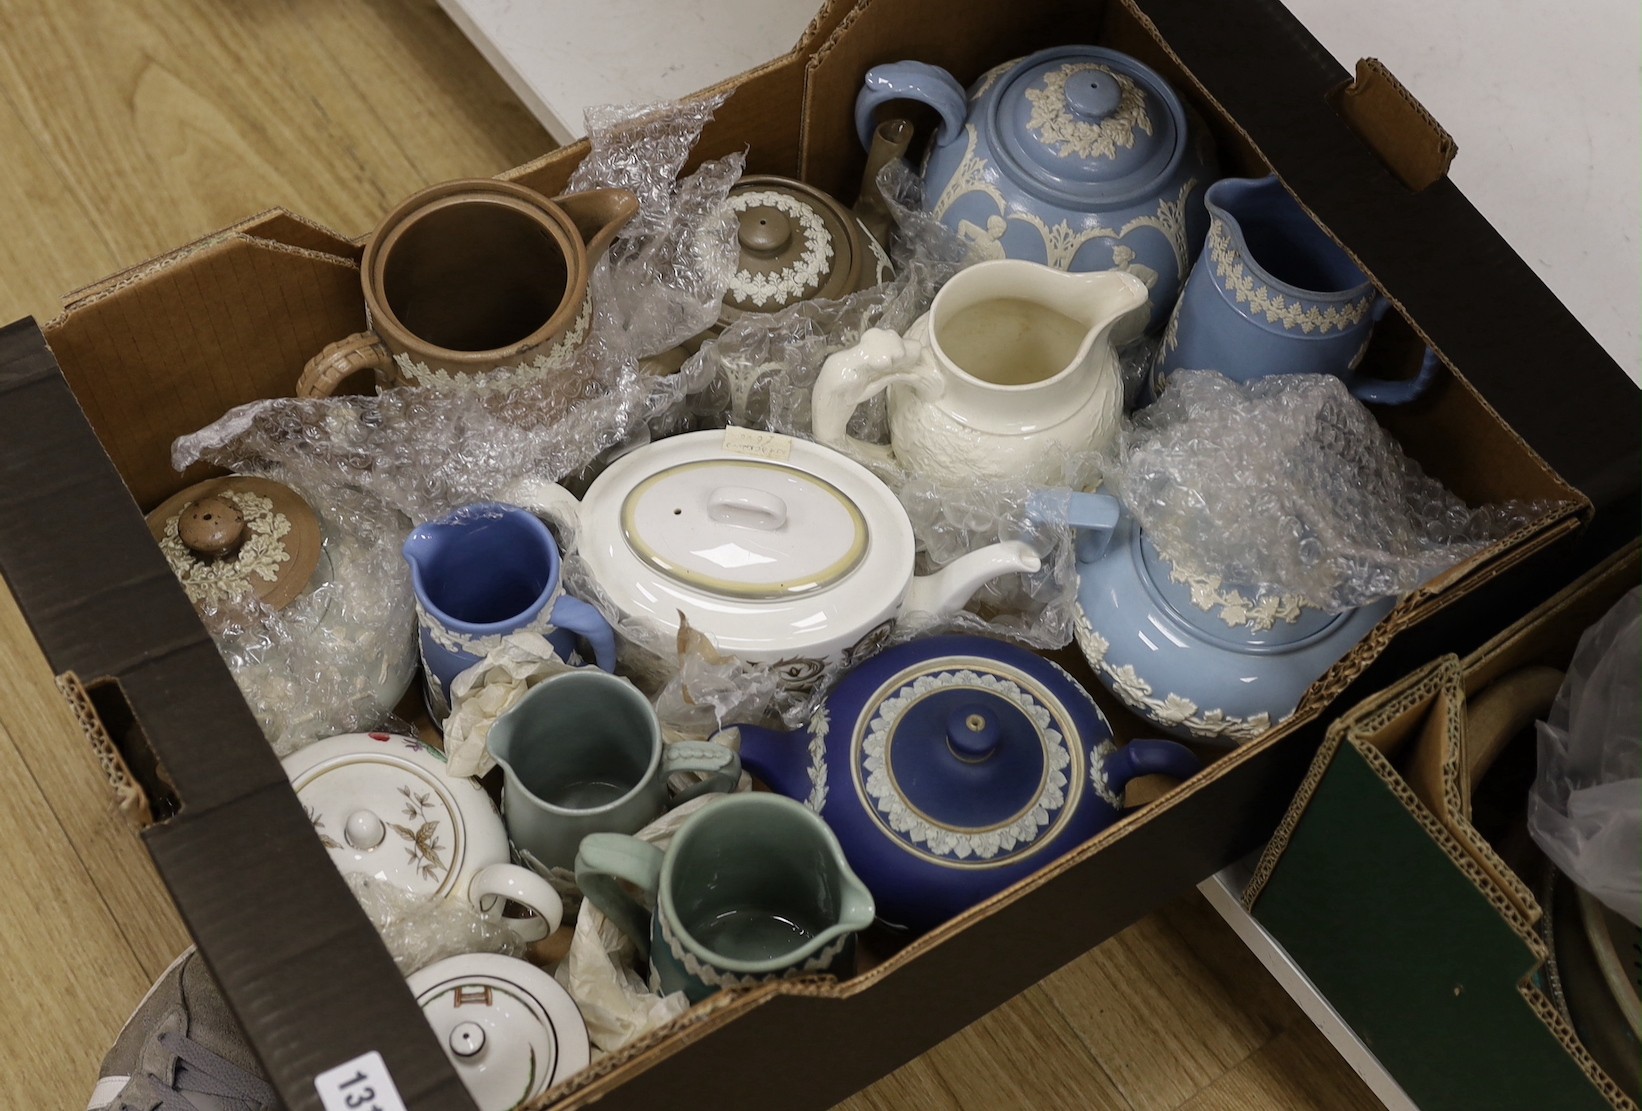 A quantity of various teapots including Wedgwood and Dudson